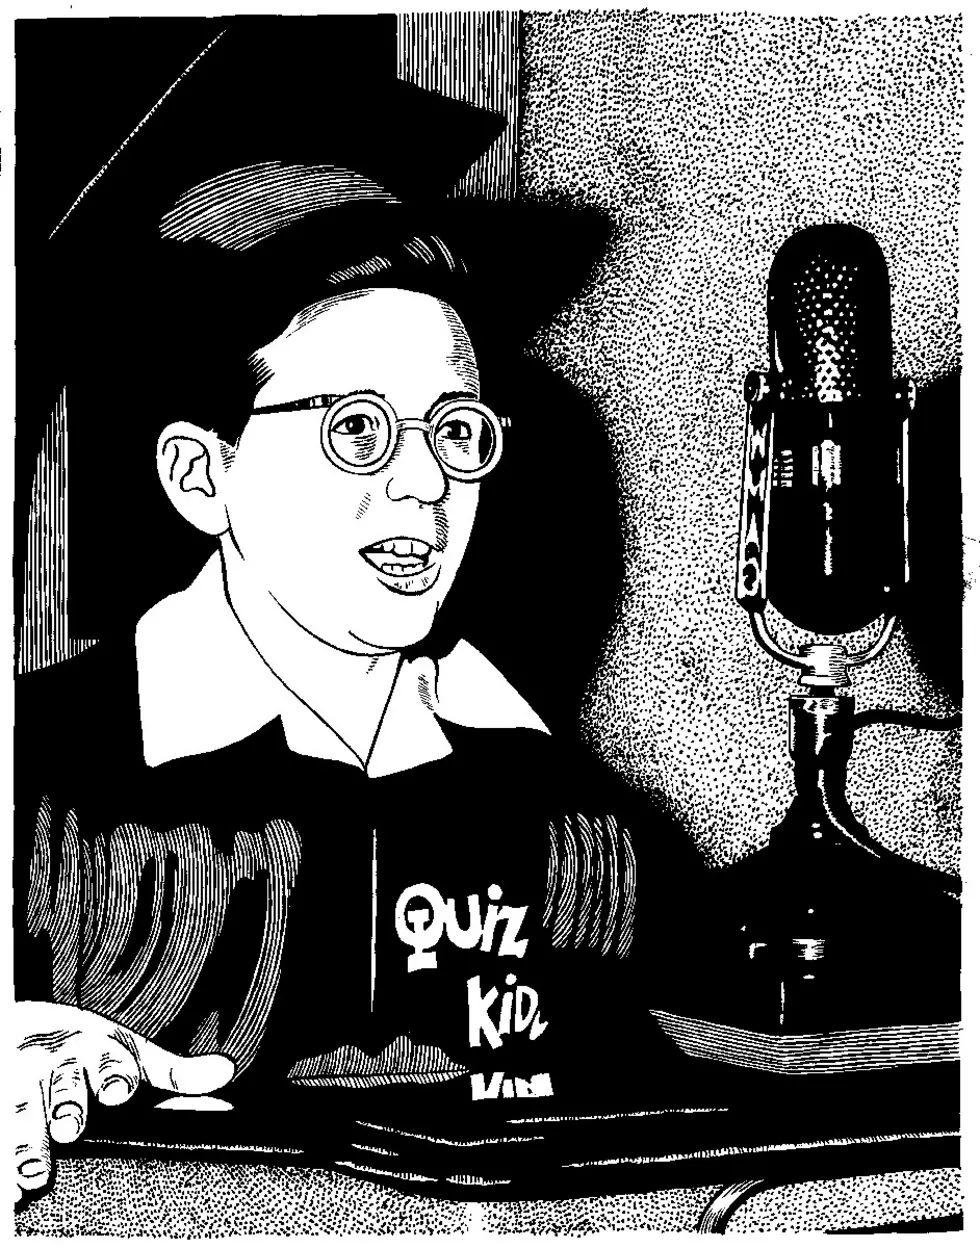 Michael Kupperman&#8217;s &#8216;All The Answers&#8217; To Explore His Father&#8217;s Childhood Career As A Quiz Kid